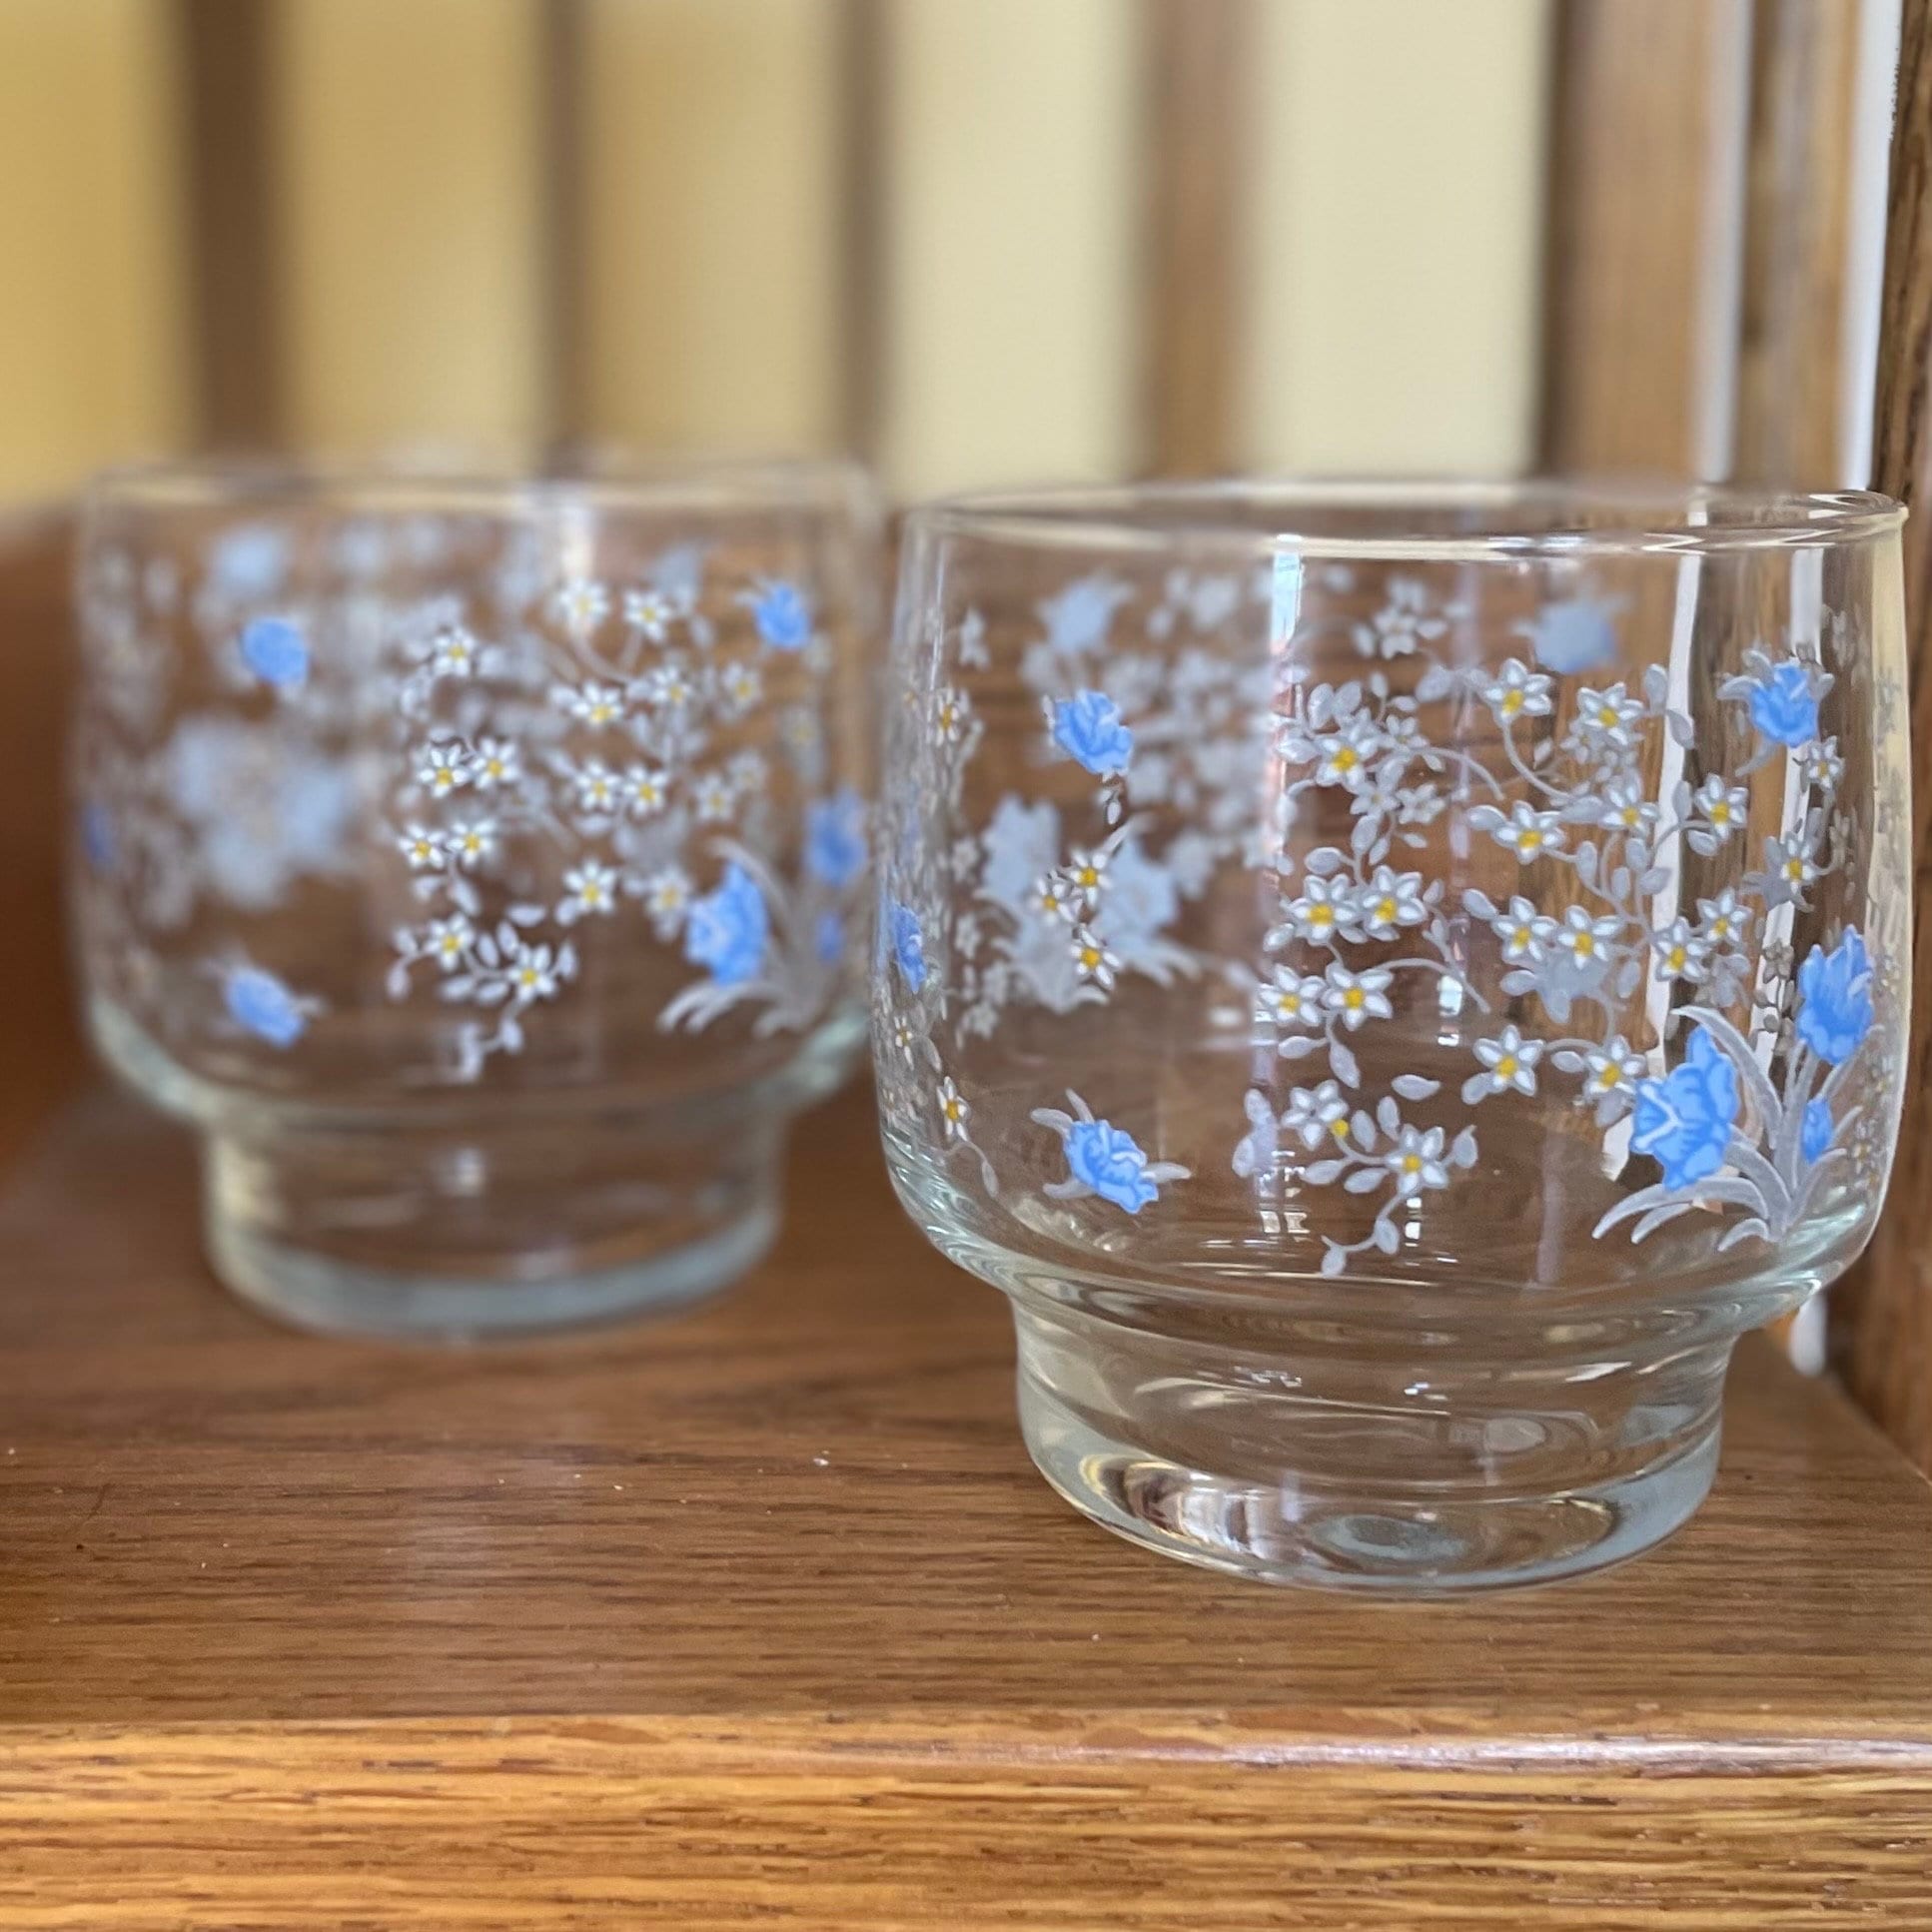 French Arcoroc Floral Small Drinking Glasses - Set of 4 - Style a